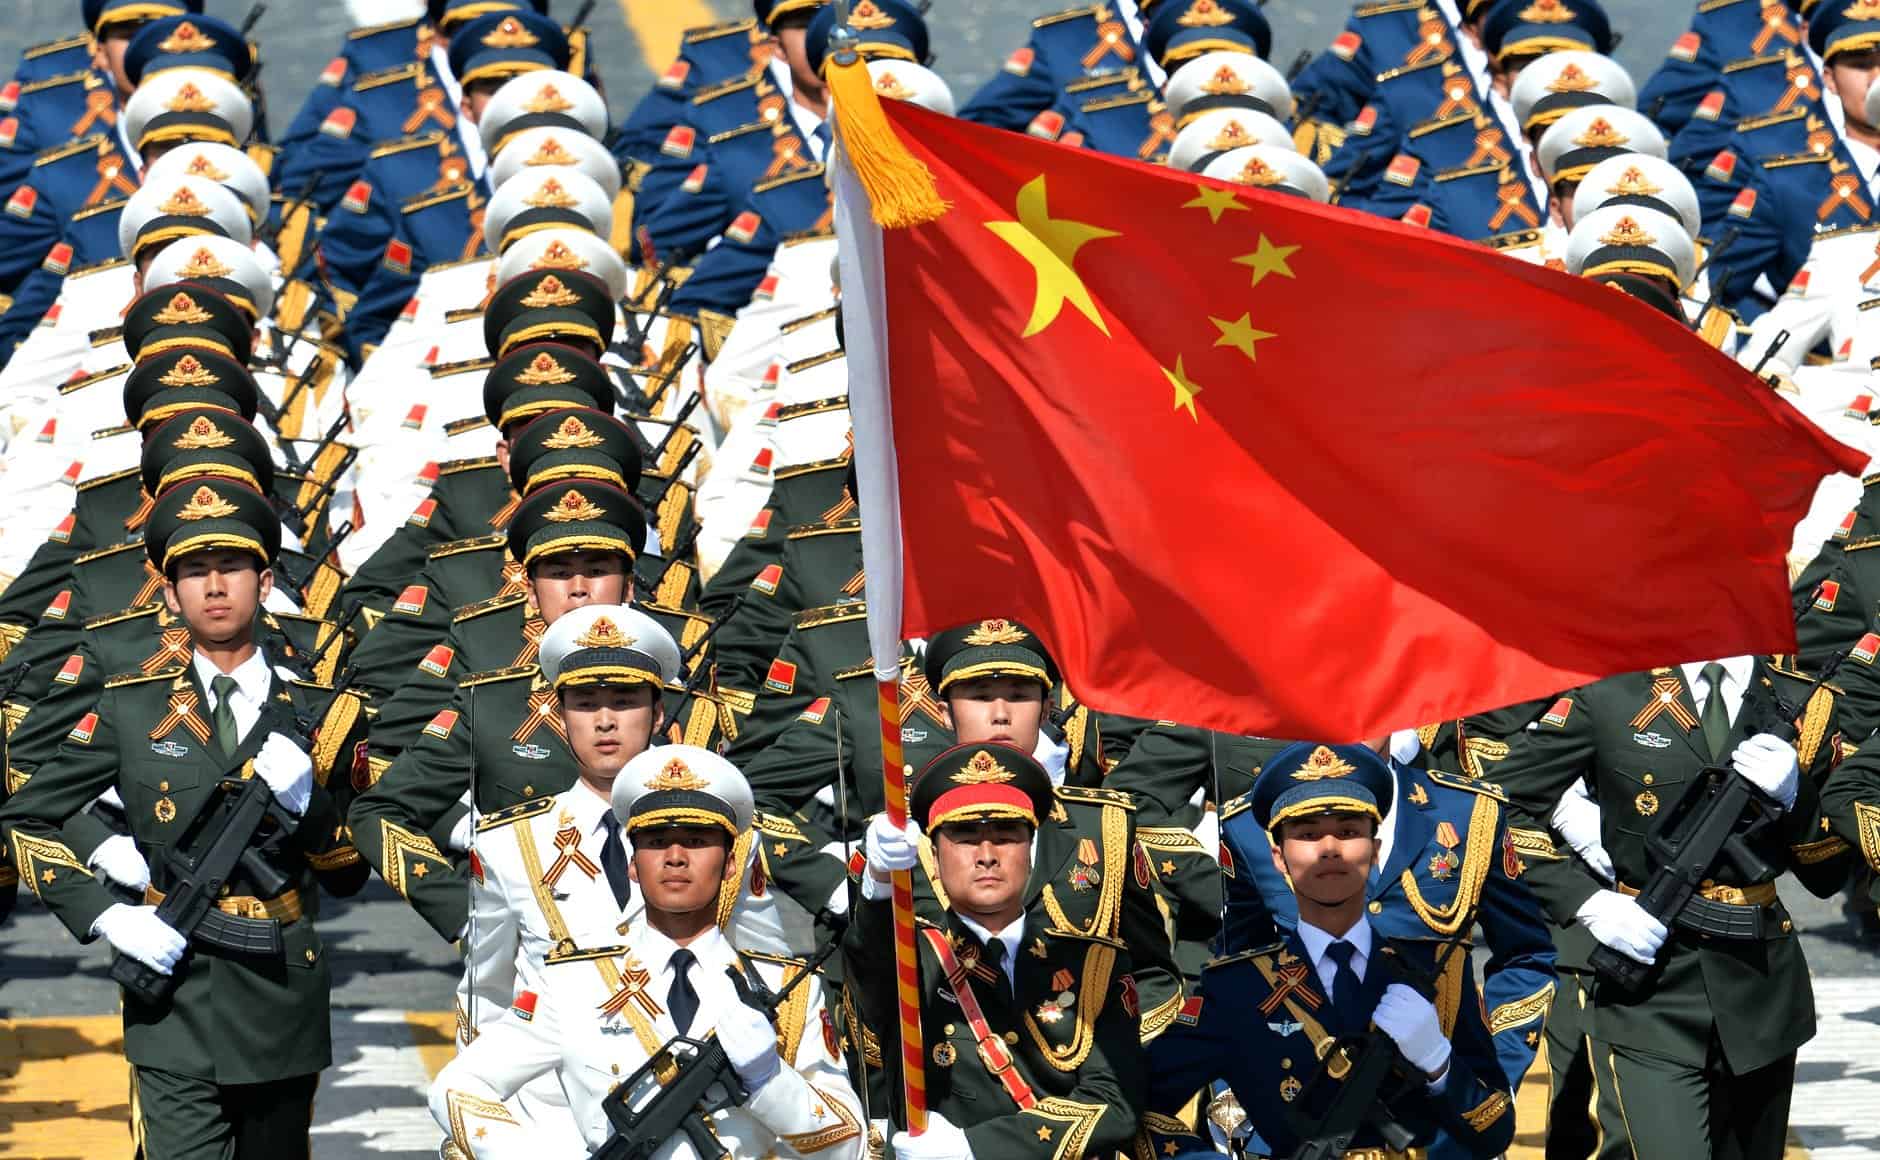 People's Liberation Army Soliders at a Parade